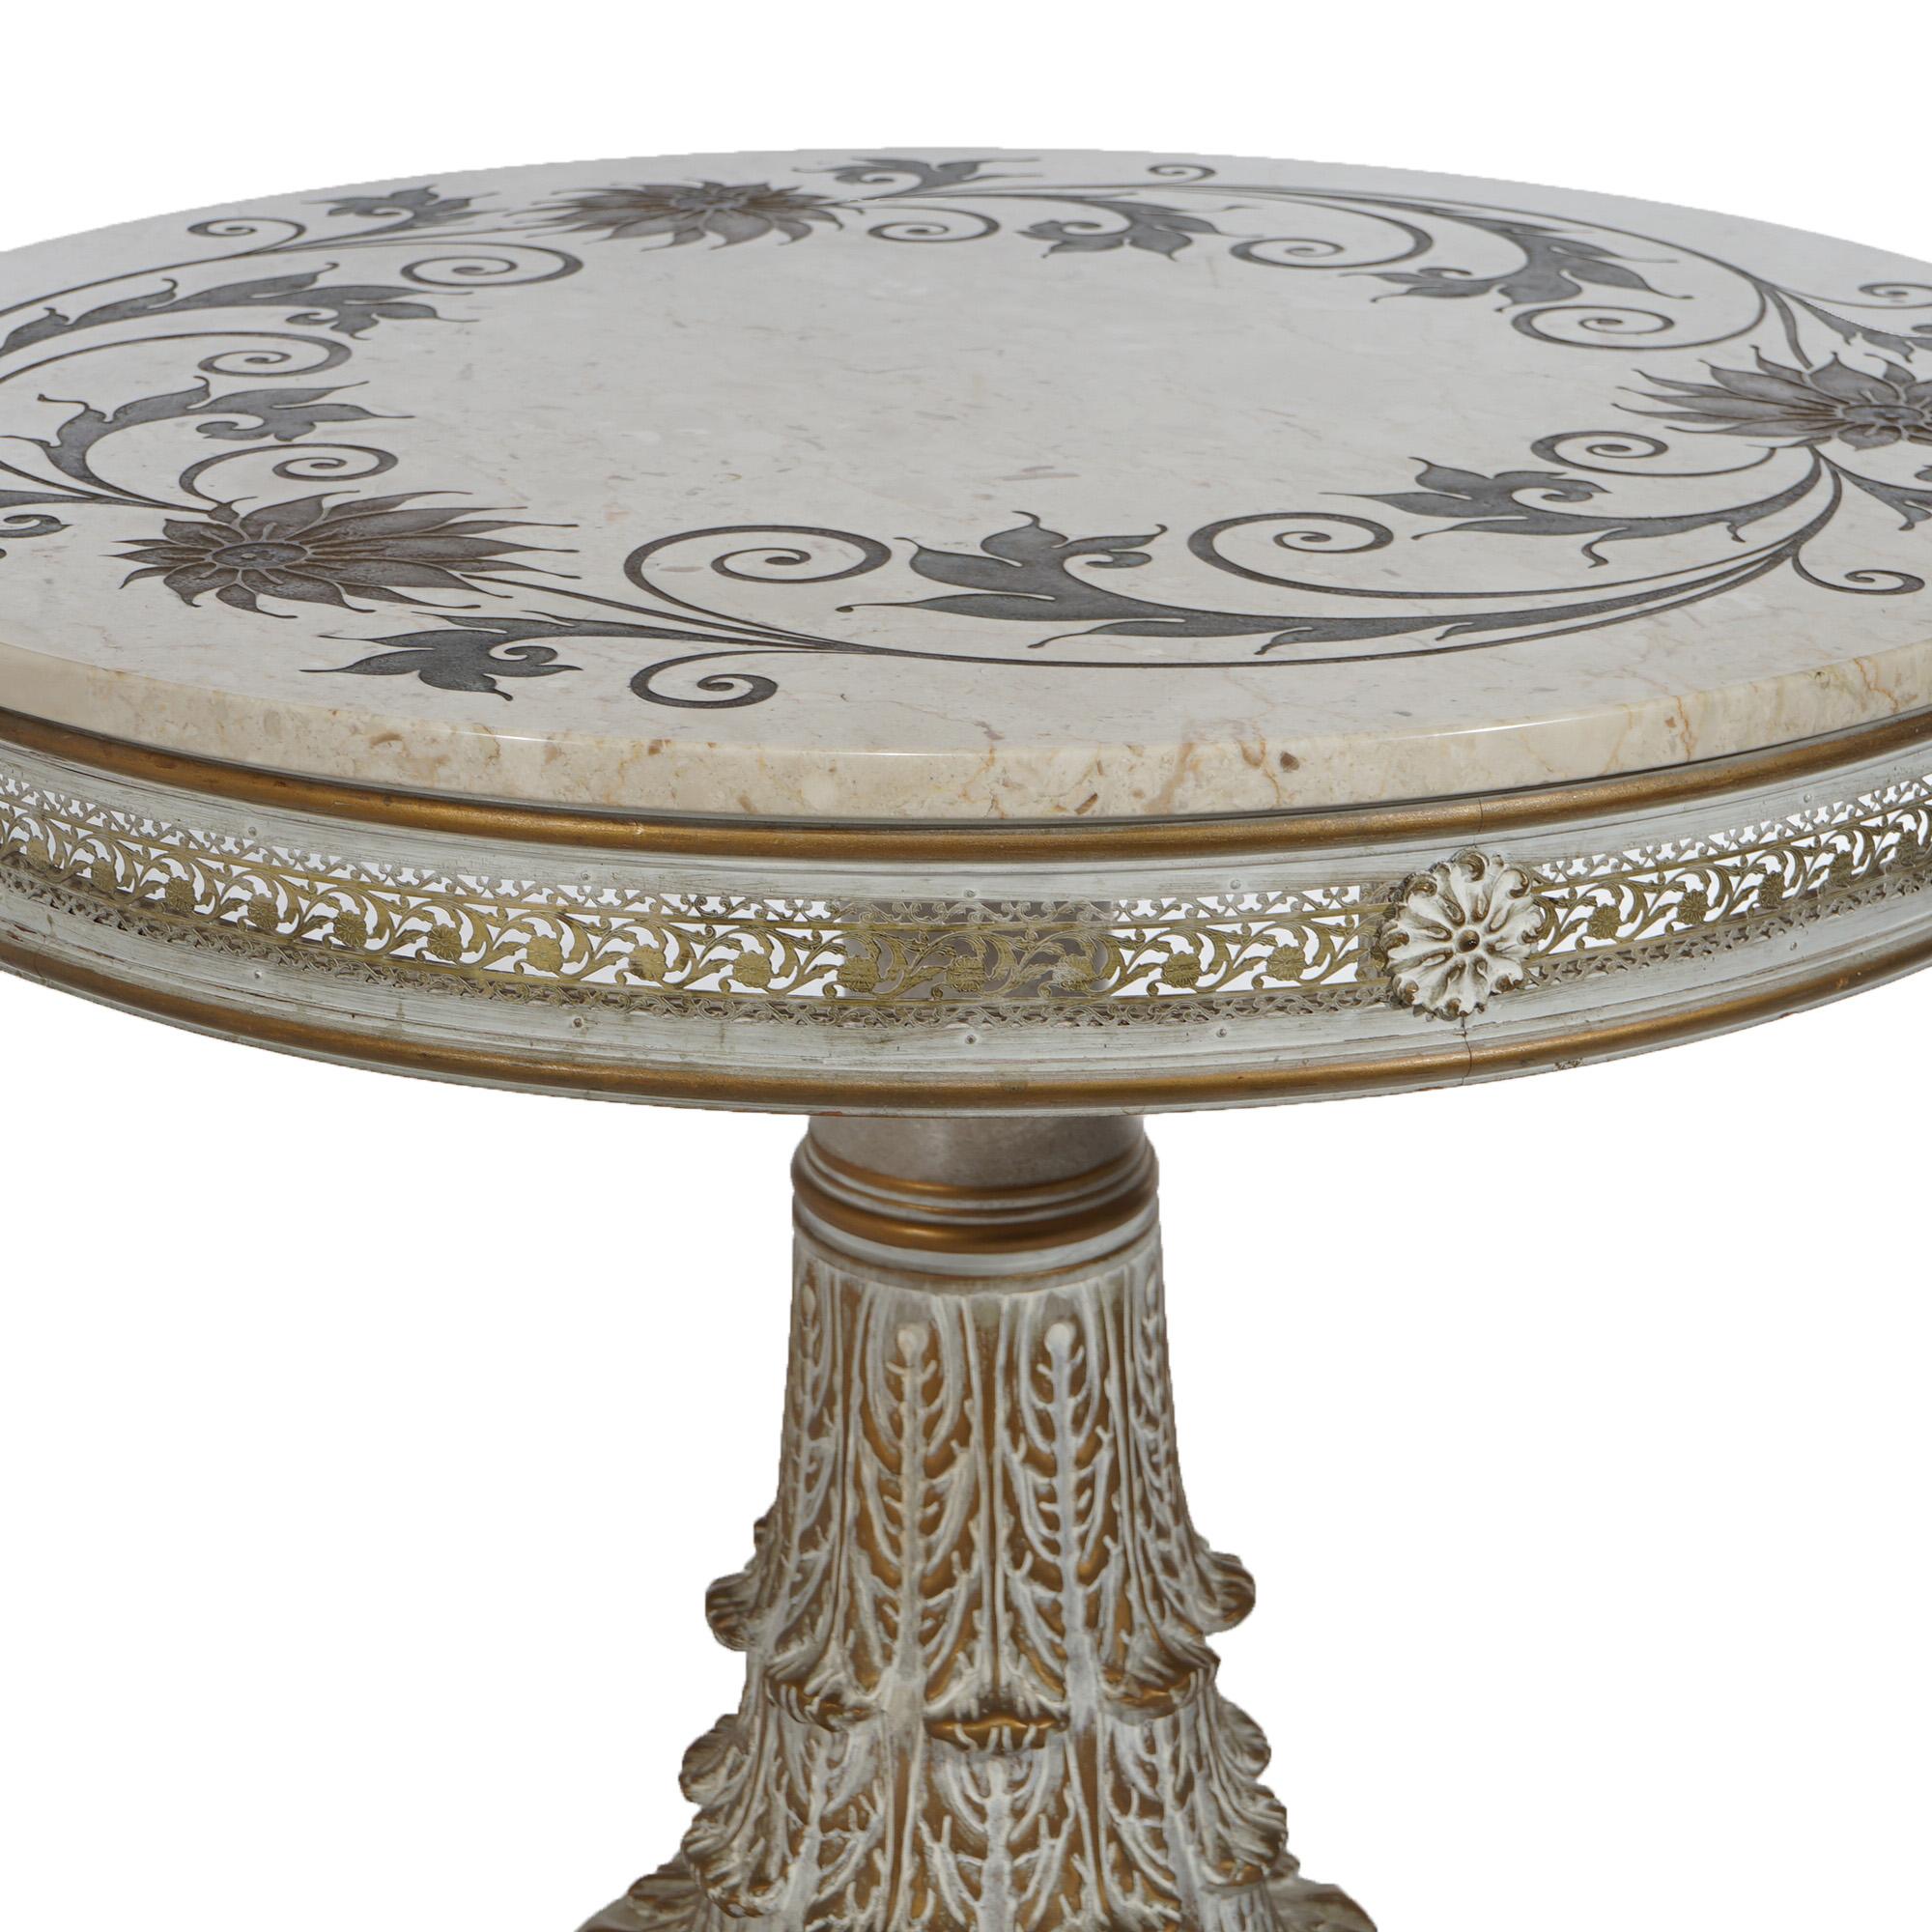 20th Century Italian Carved Wood & Foliate Inlaid Marble Center Table, 20th C